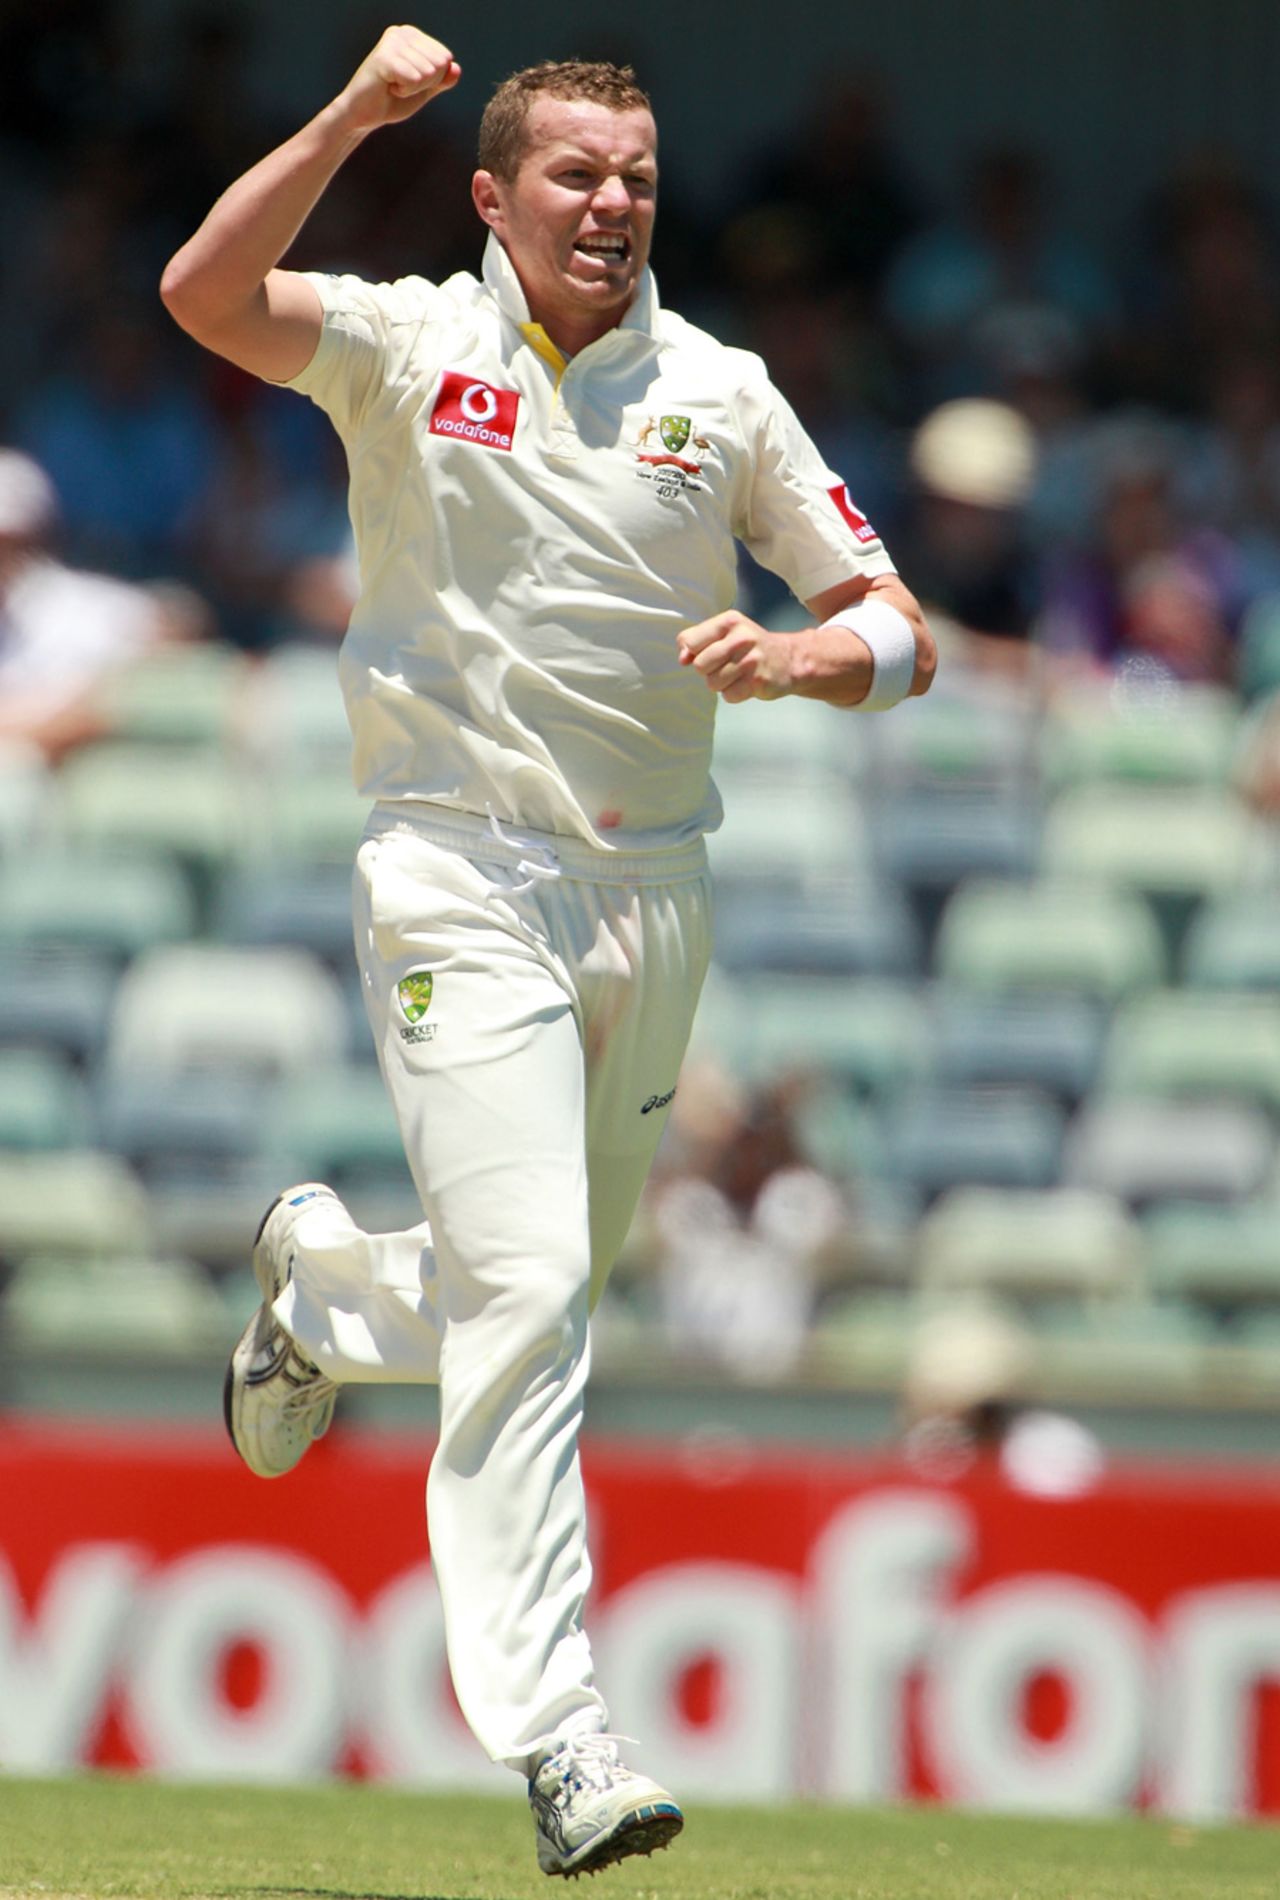 Peter Siddle celebrates the dismissal of MS Dhoni, Australia v India, 3rd Test, Perth, 3rd day, January 15, 2012